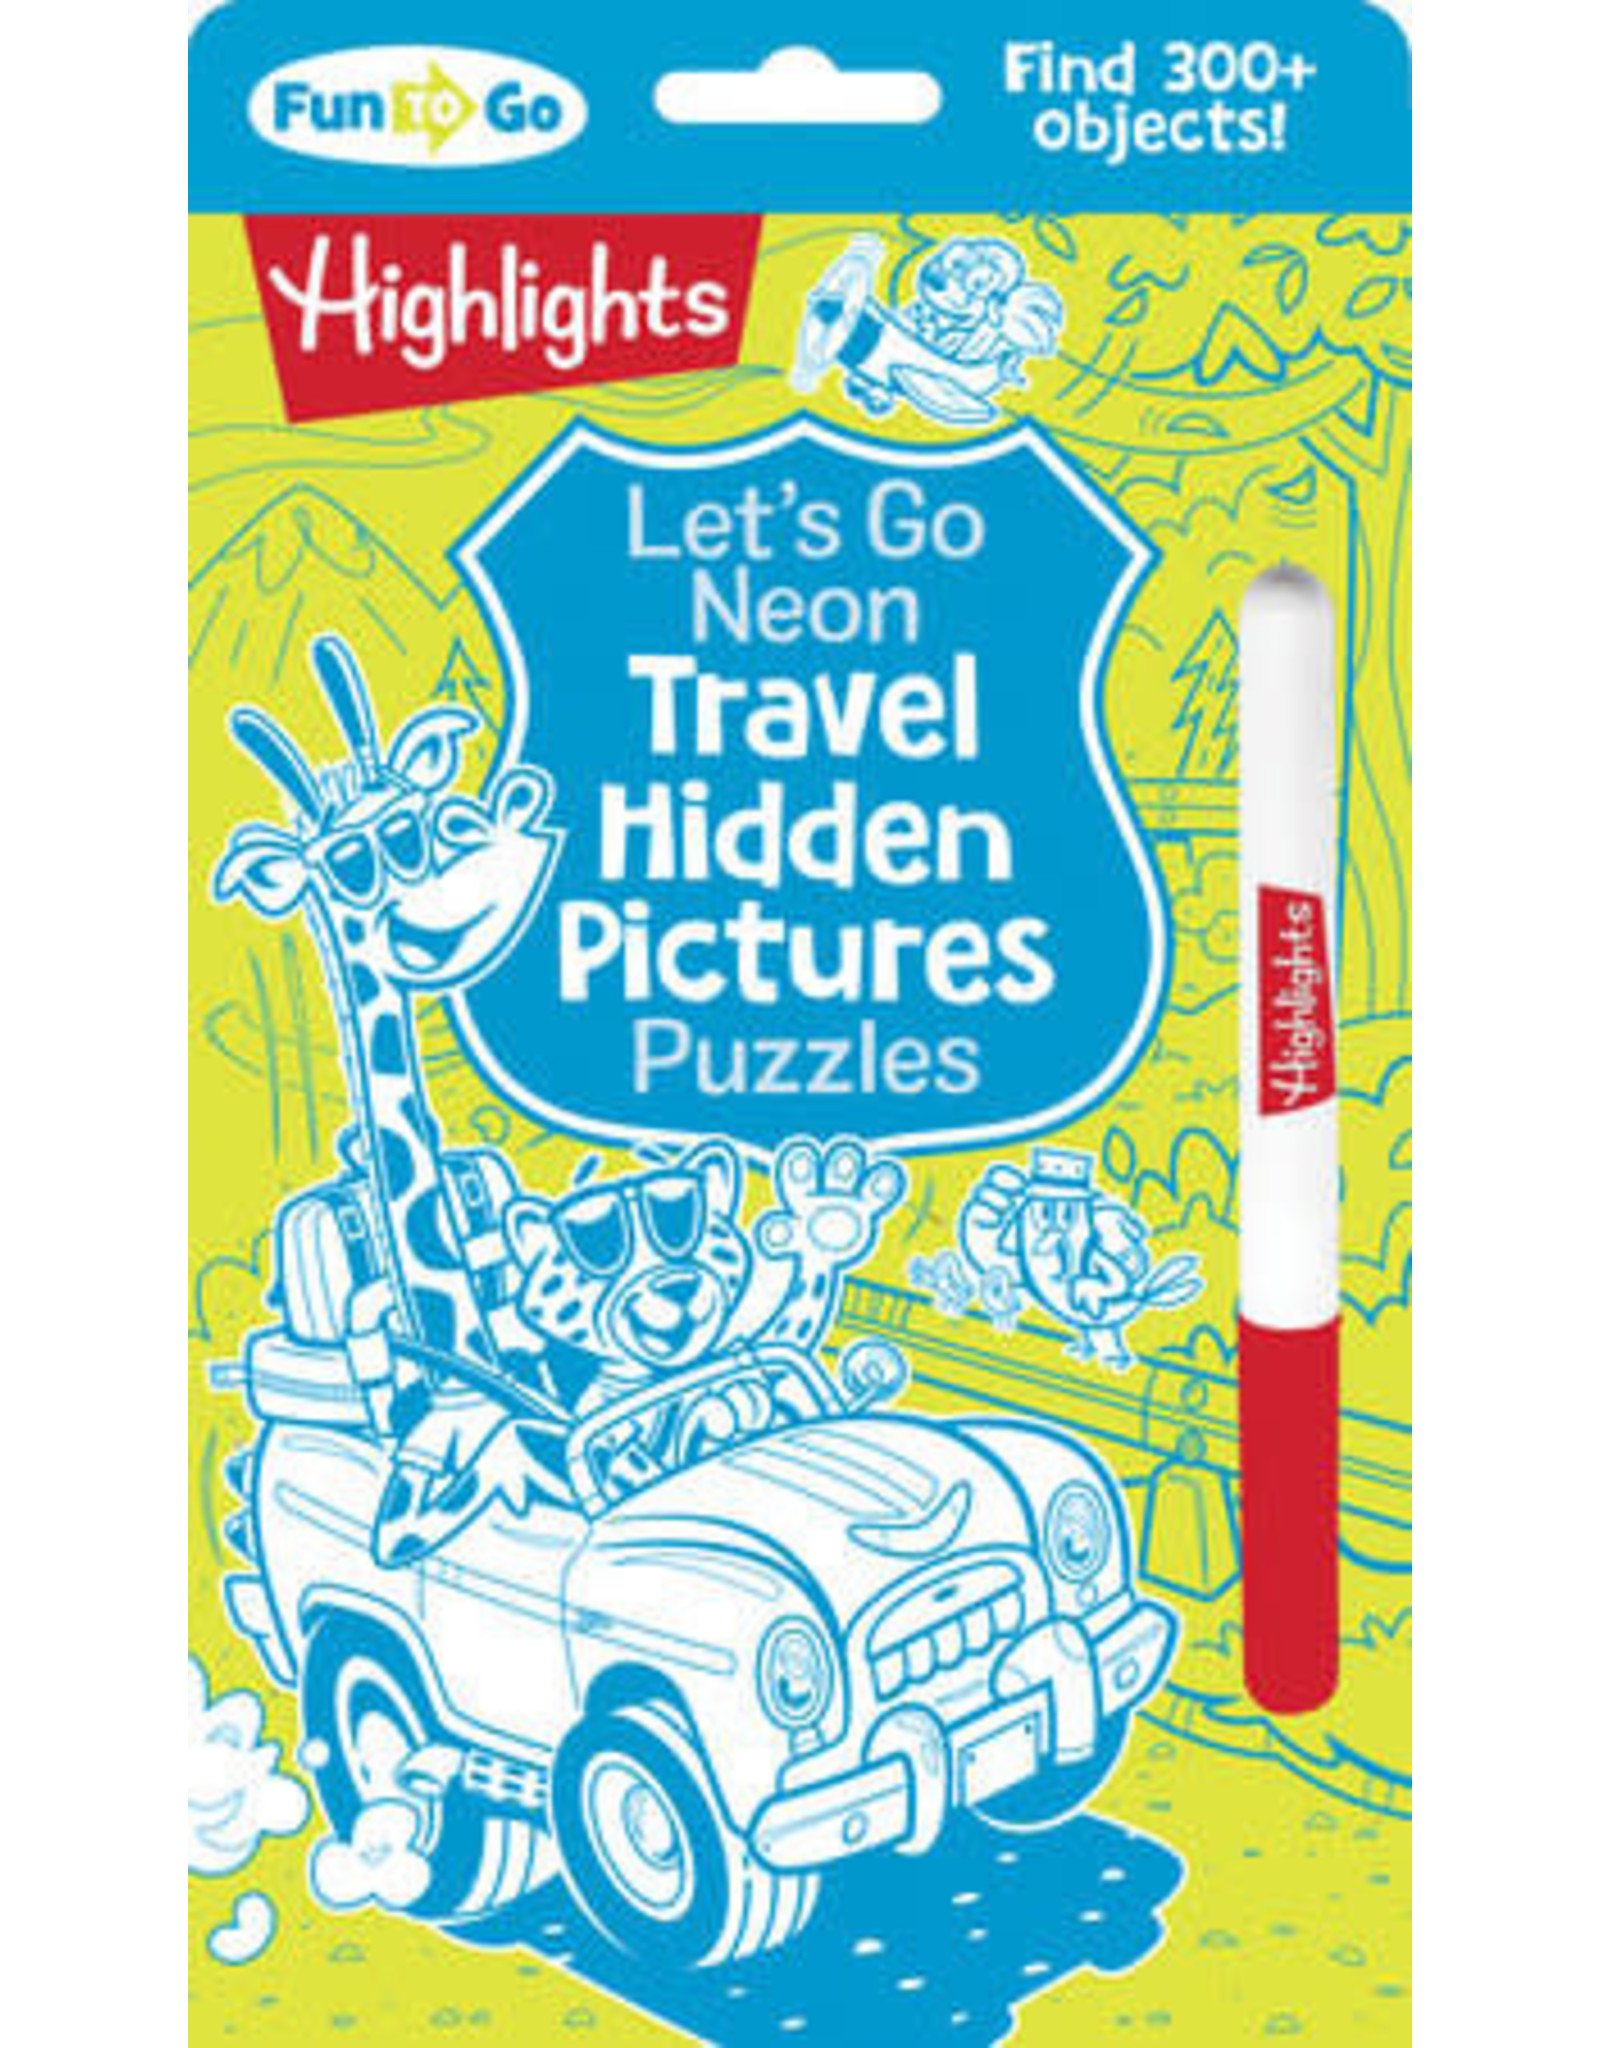 Highlights Highlights Let's Go Neon Travel Hidden Pictures Puzzles